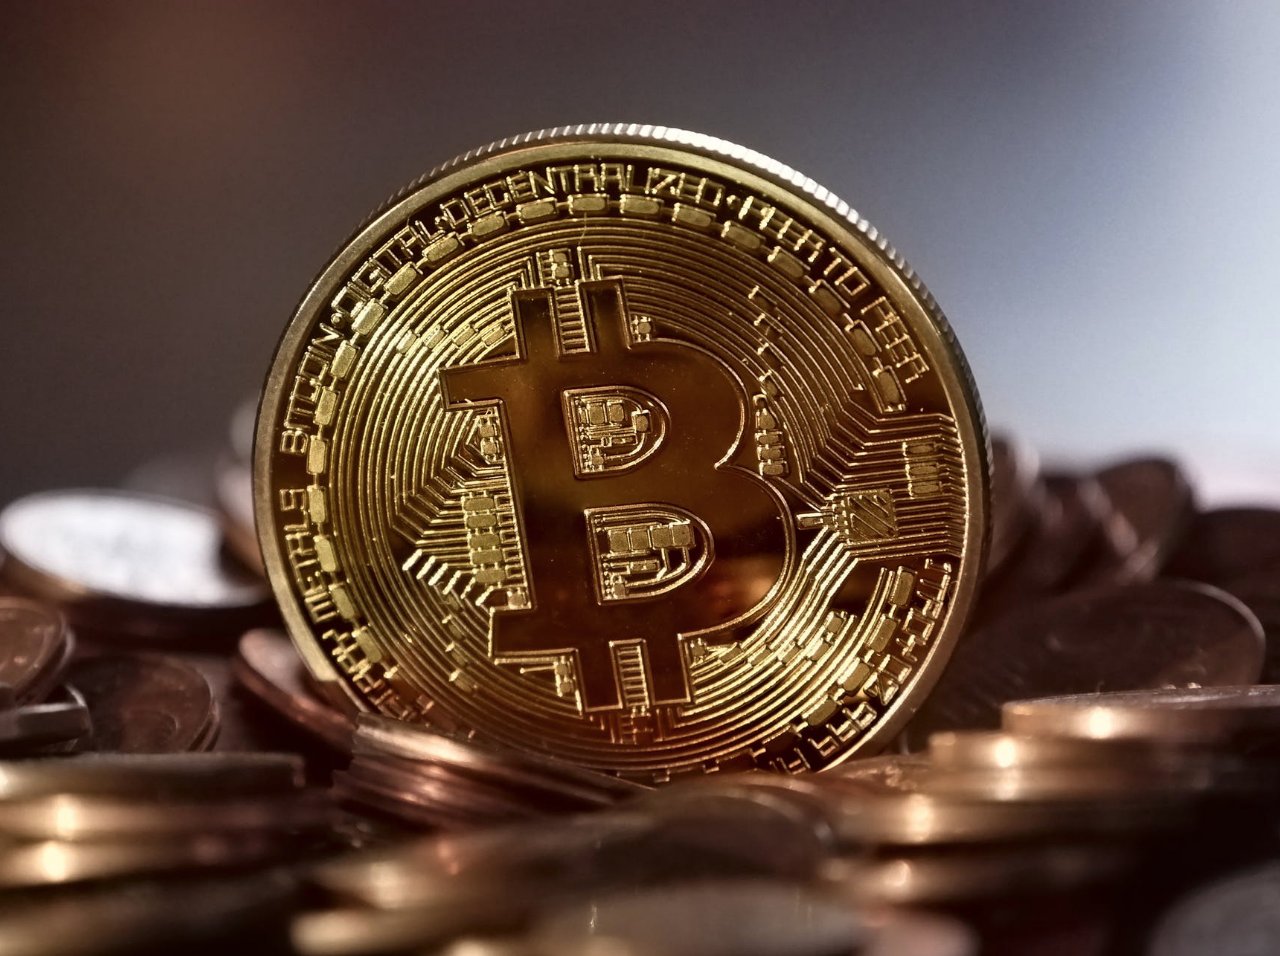 8 expert insights on what will happen with Bitcoin in 2019